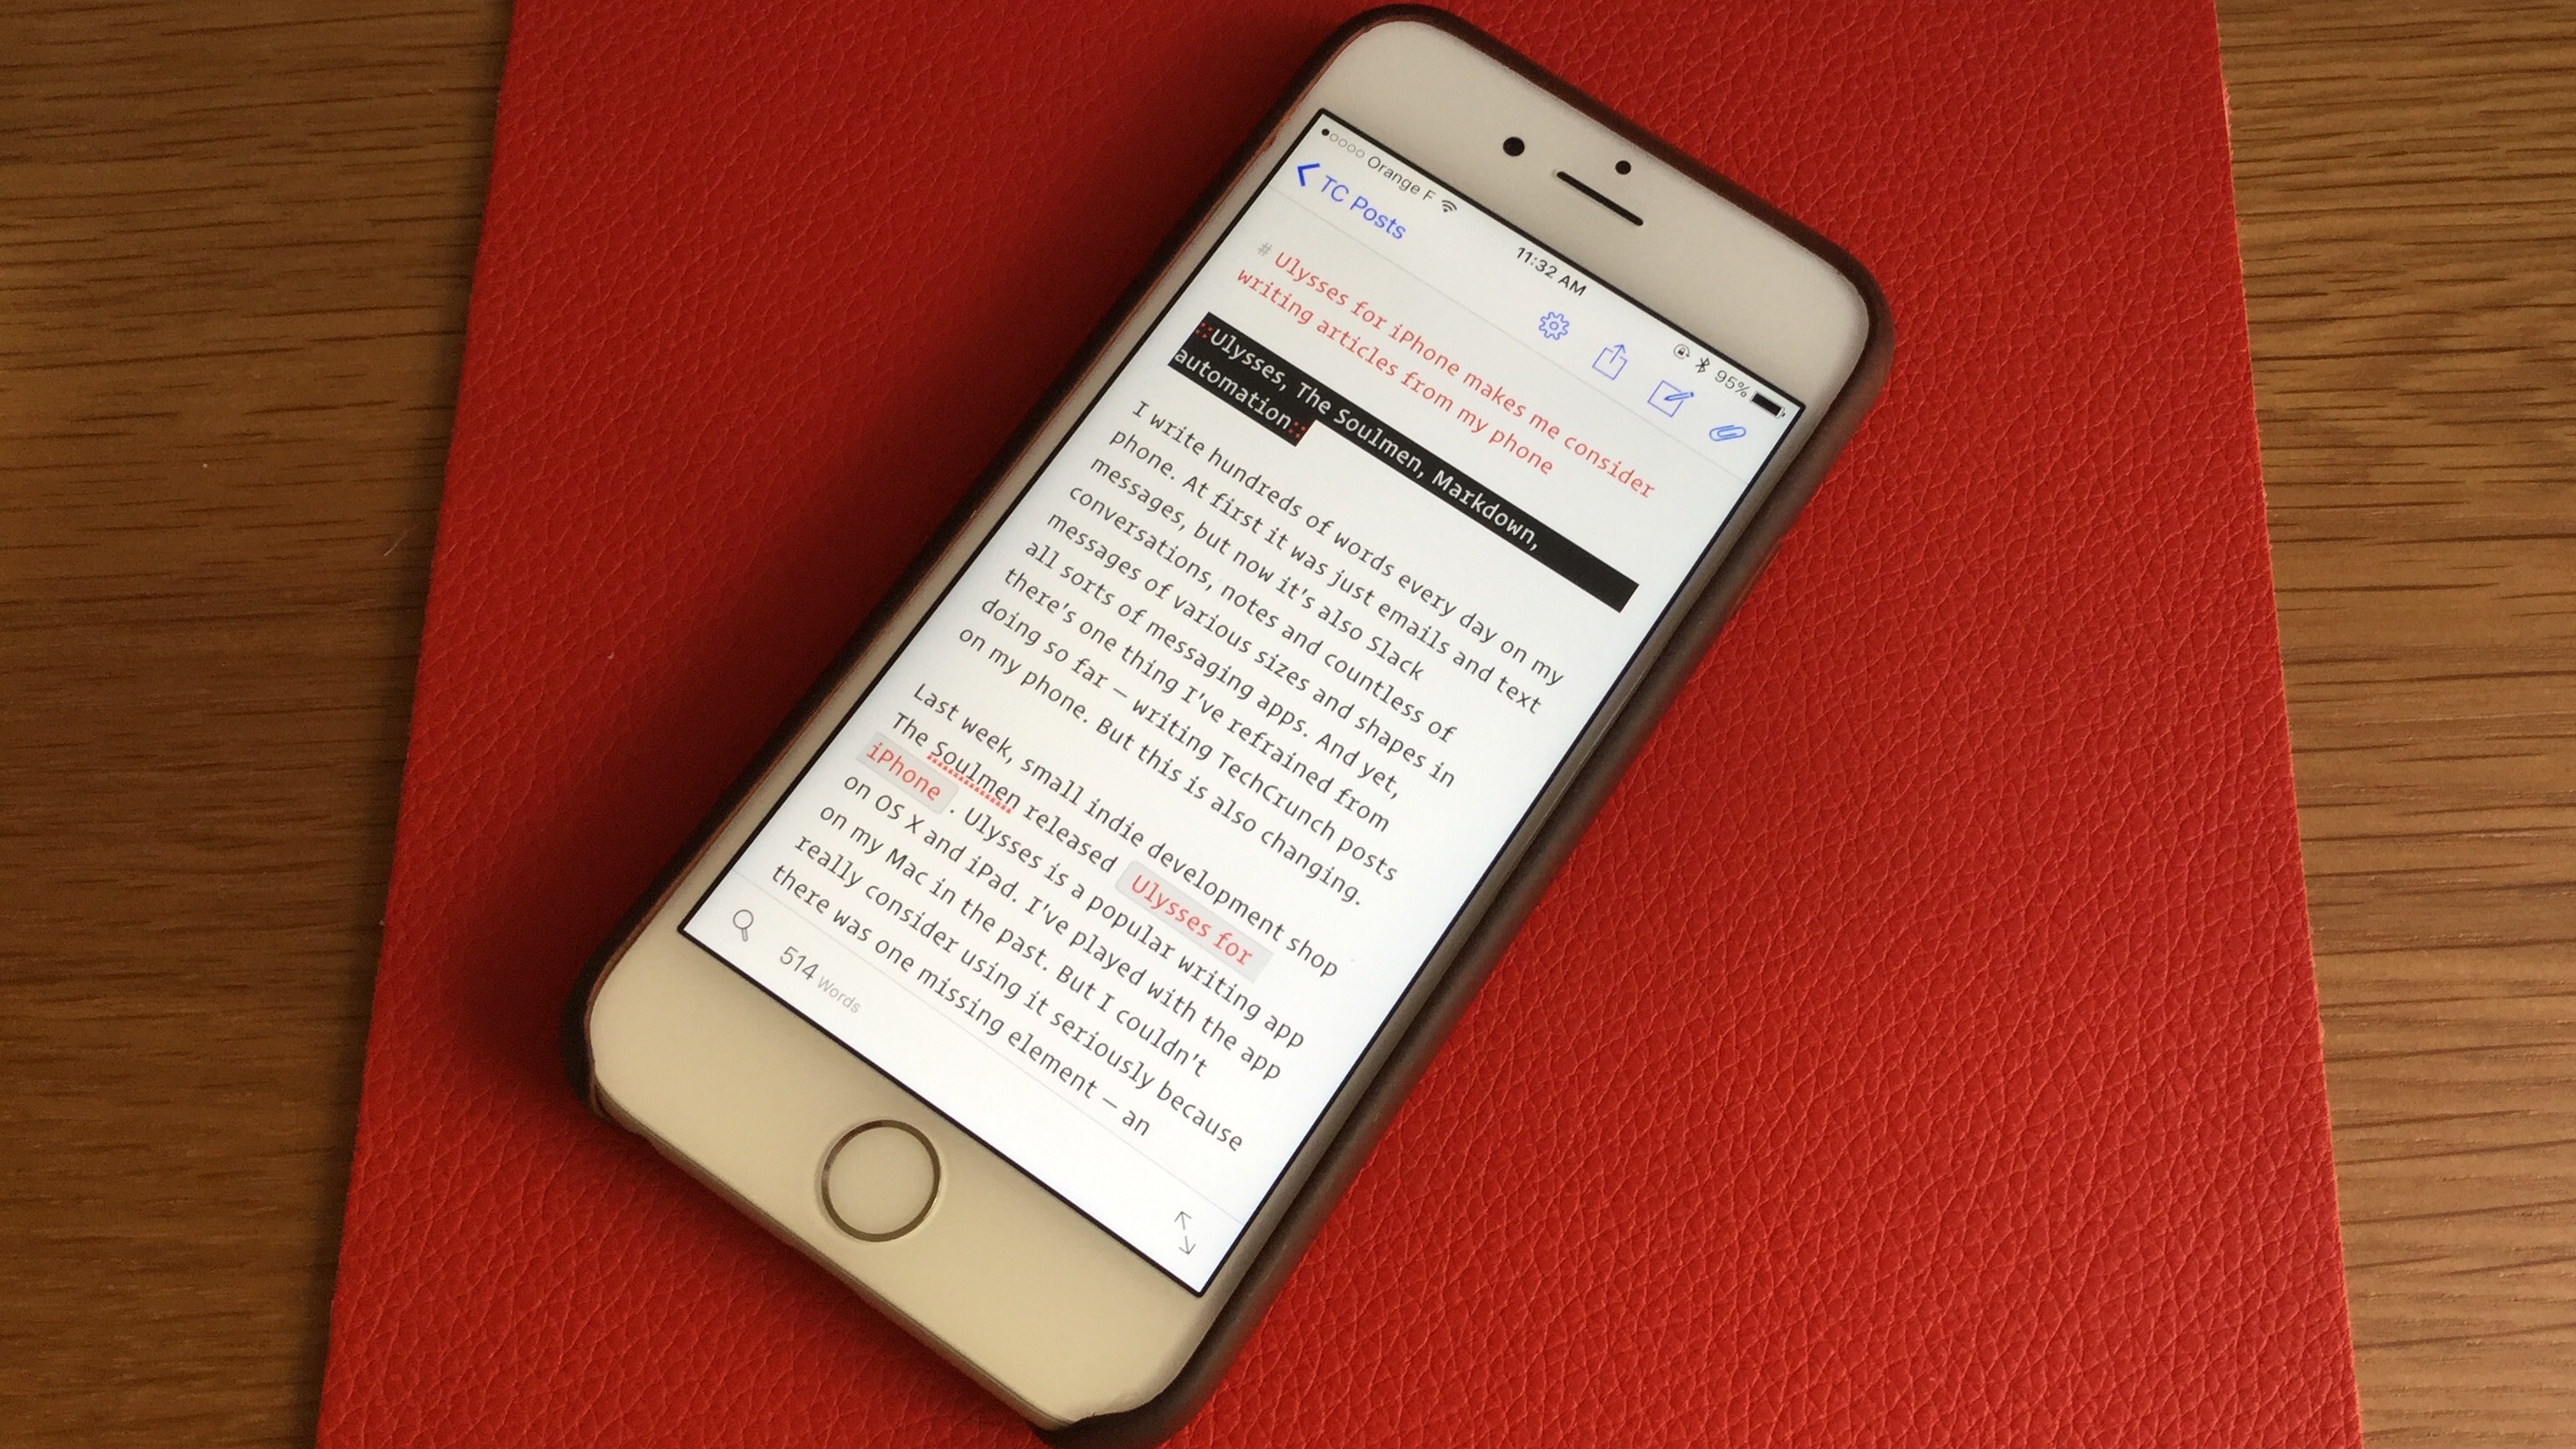 Ulysses for iPhone makes me consider writing articles on my phone